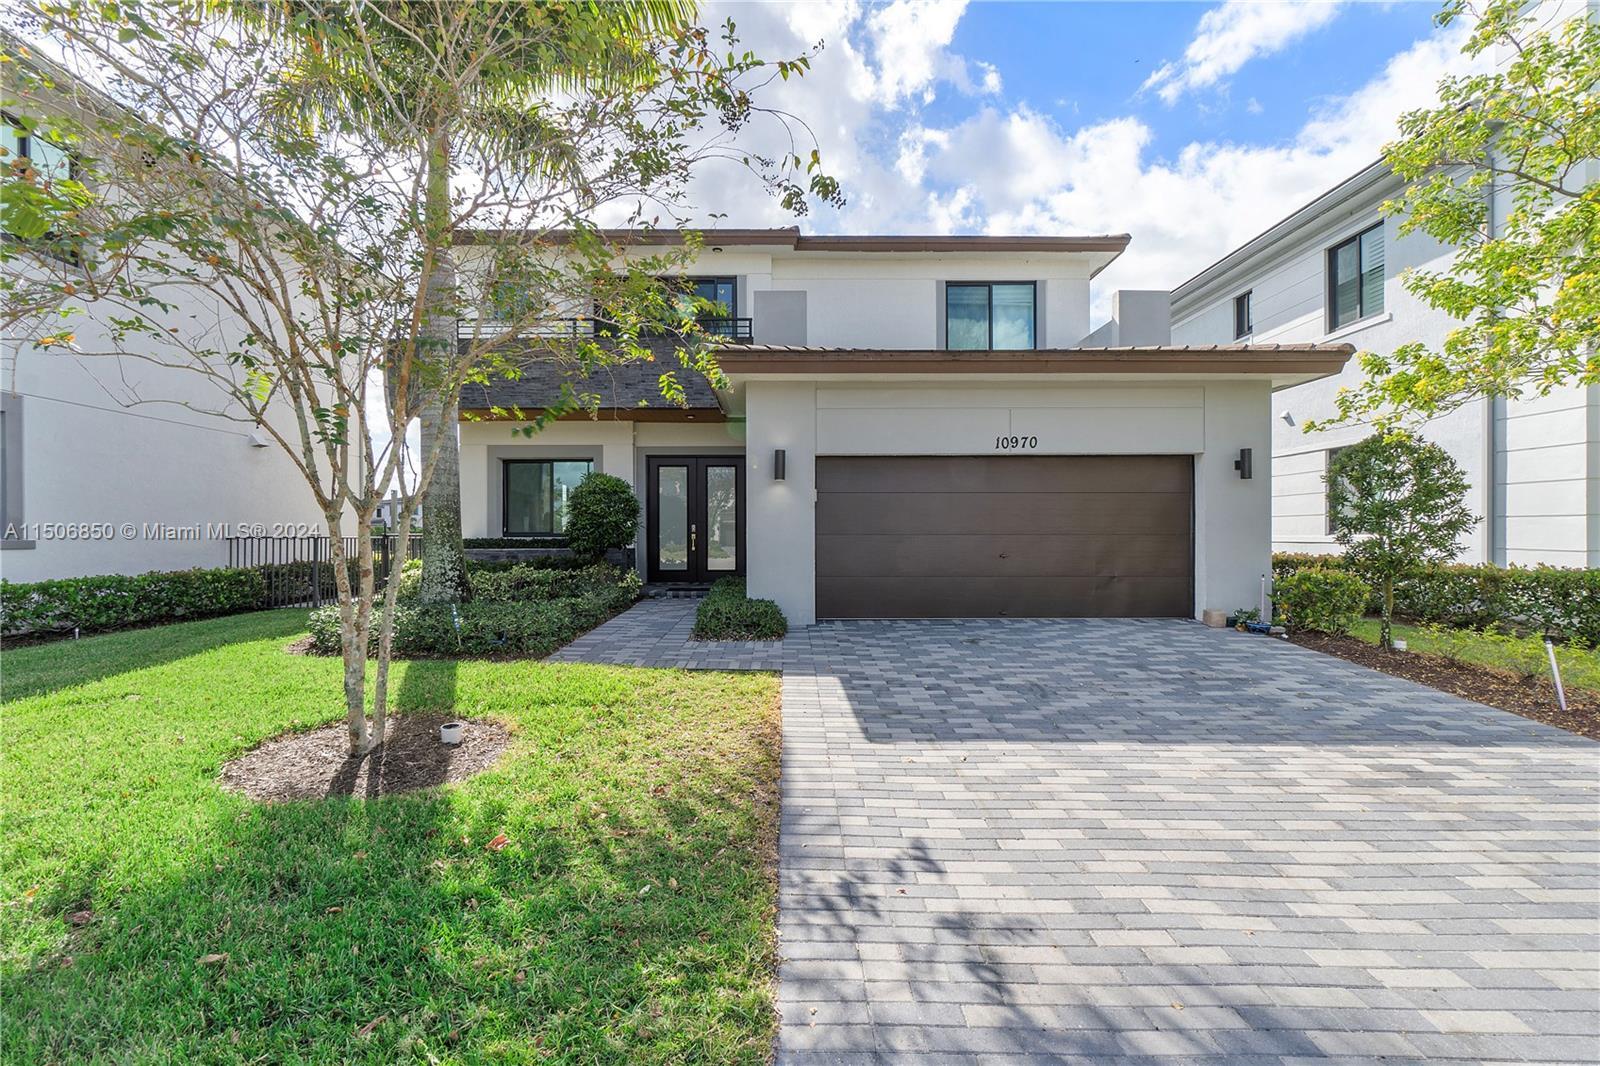 Photo of 10970 Pacifica Wy in Parkland, FL